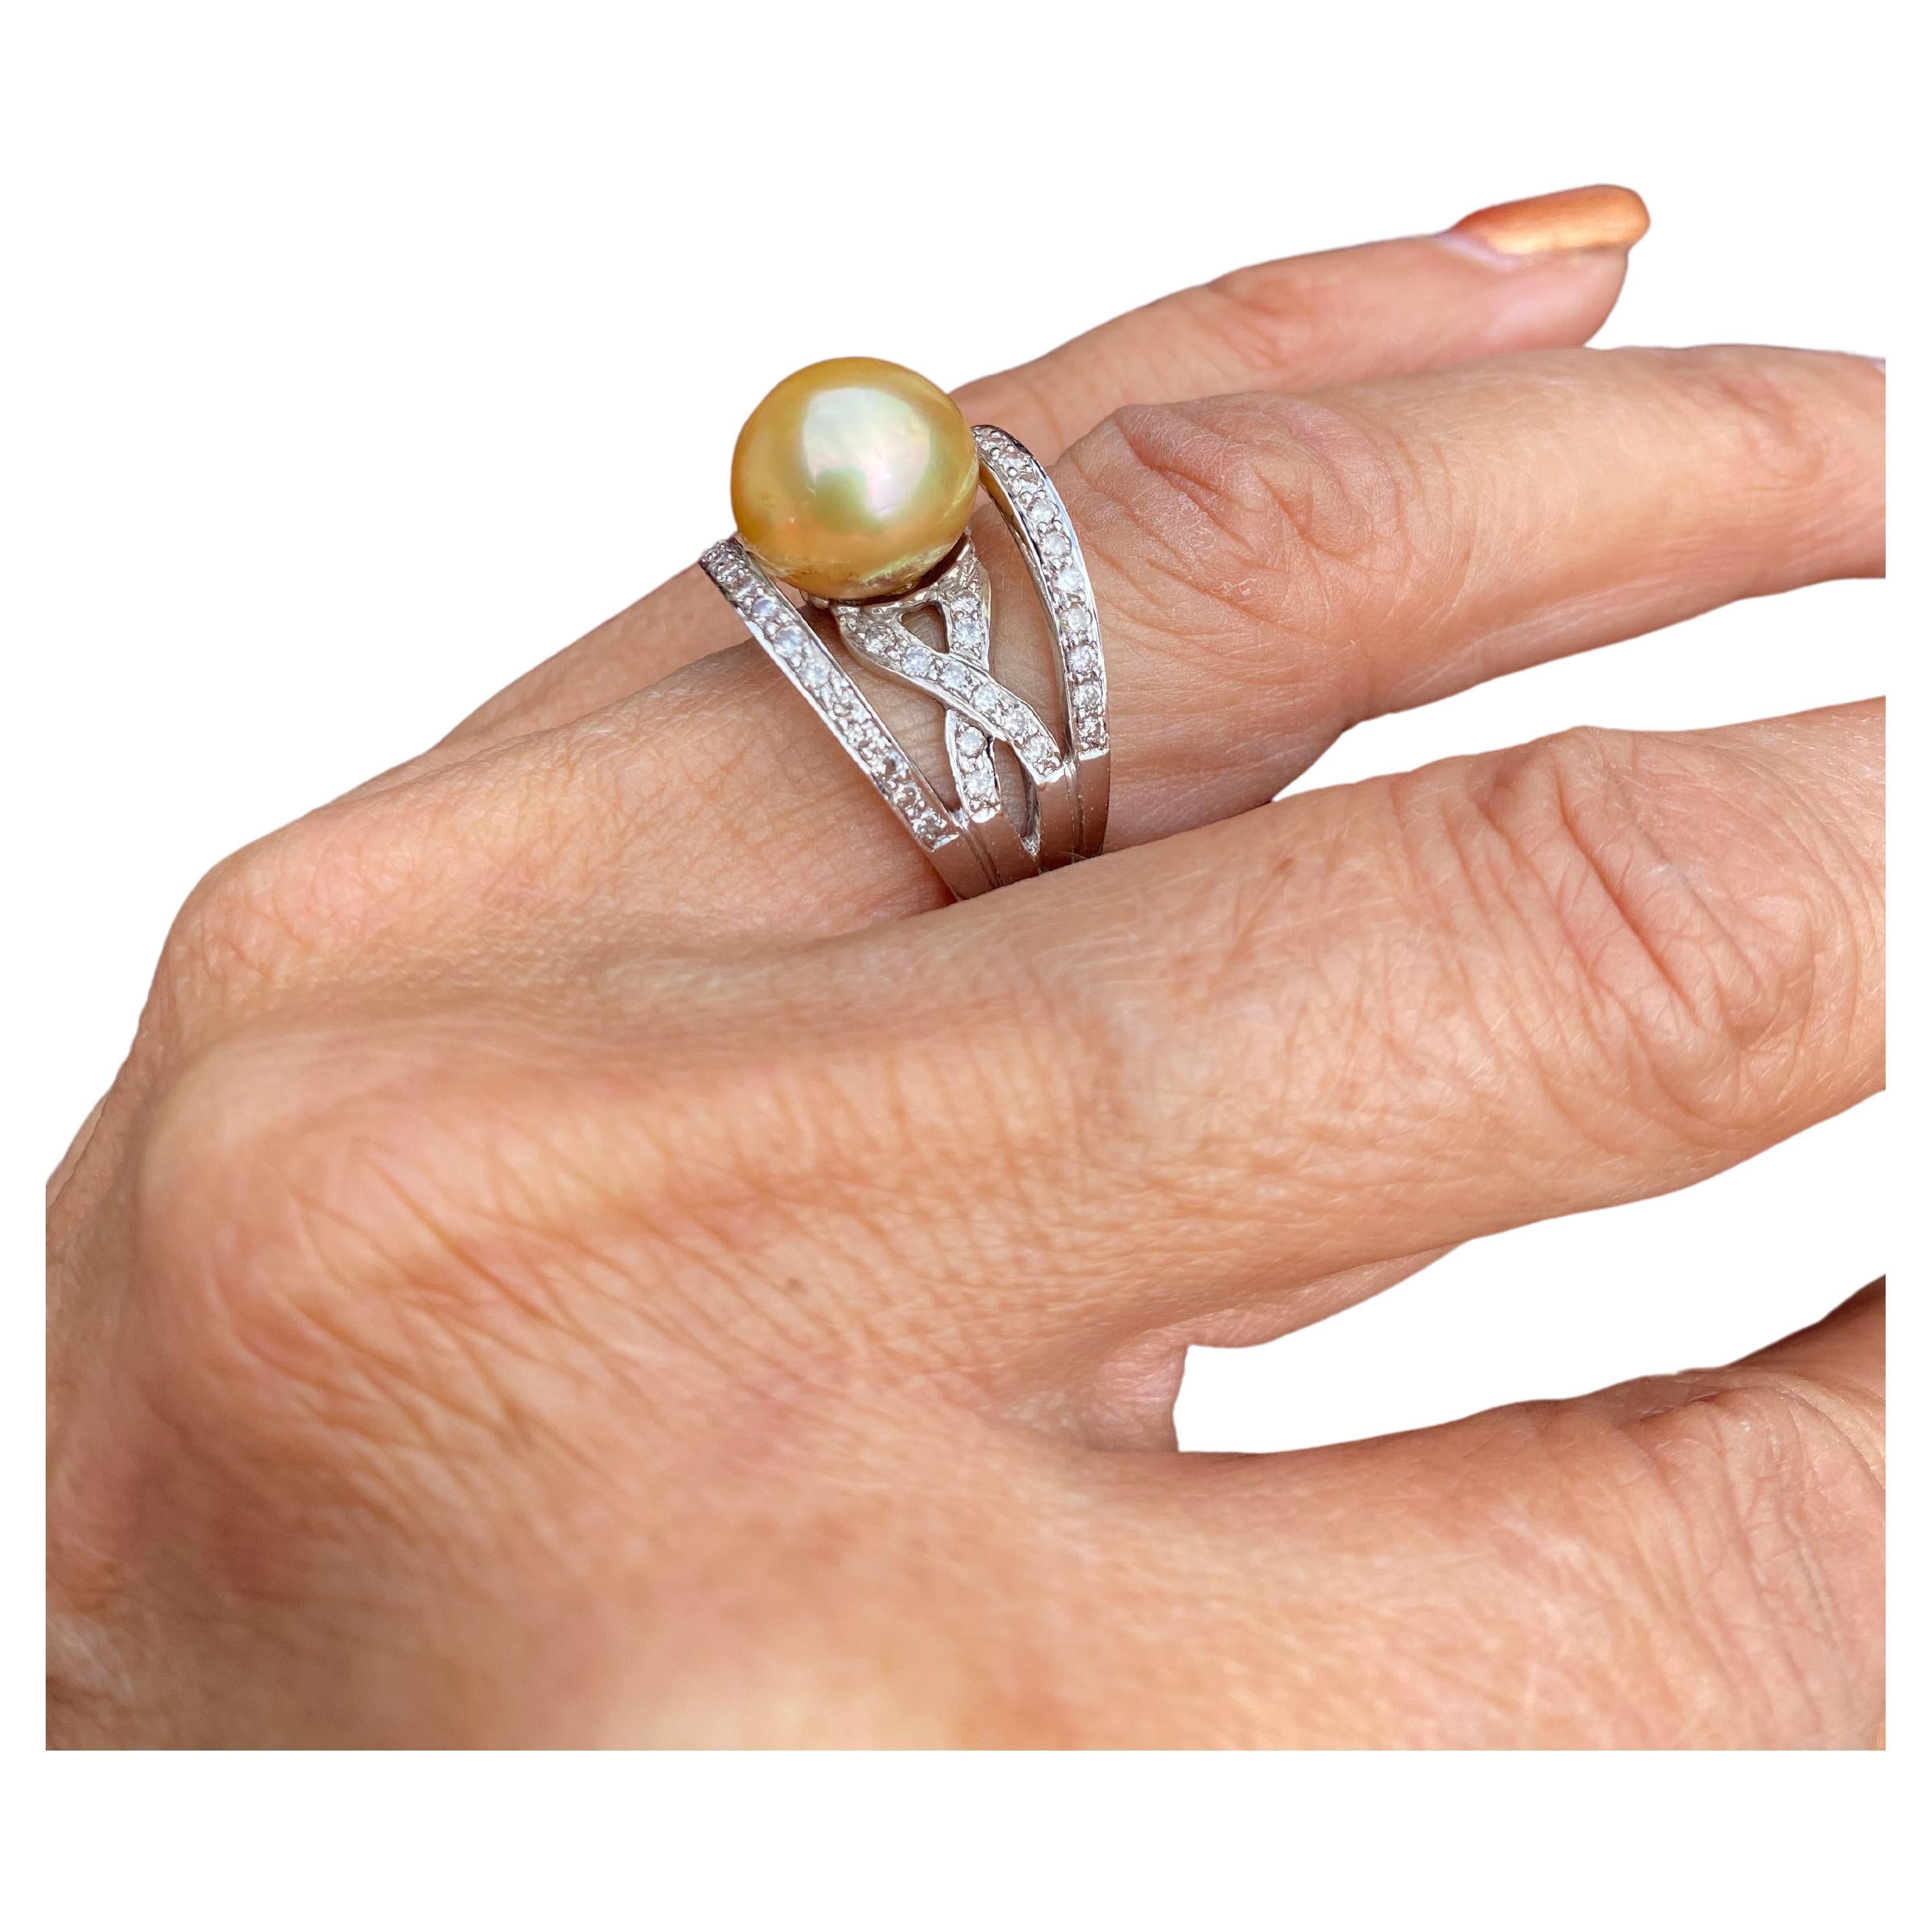 The ring is 16 mm wide with a quality 12mm Golden Pearl centered. The pearl's quality is A quality with very few blemishes.
Diamonds are paved and set in a modern contemporary design having a total weight of .87 carat (inscribed on the inside of the